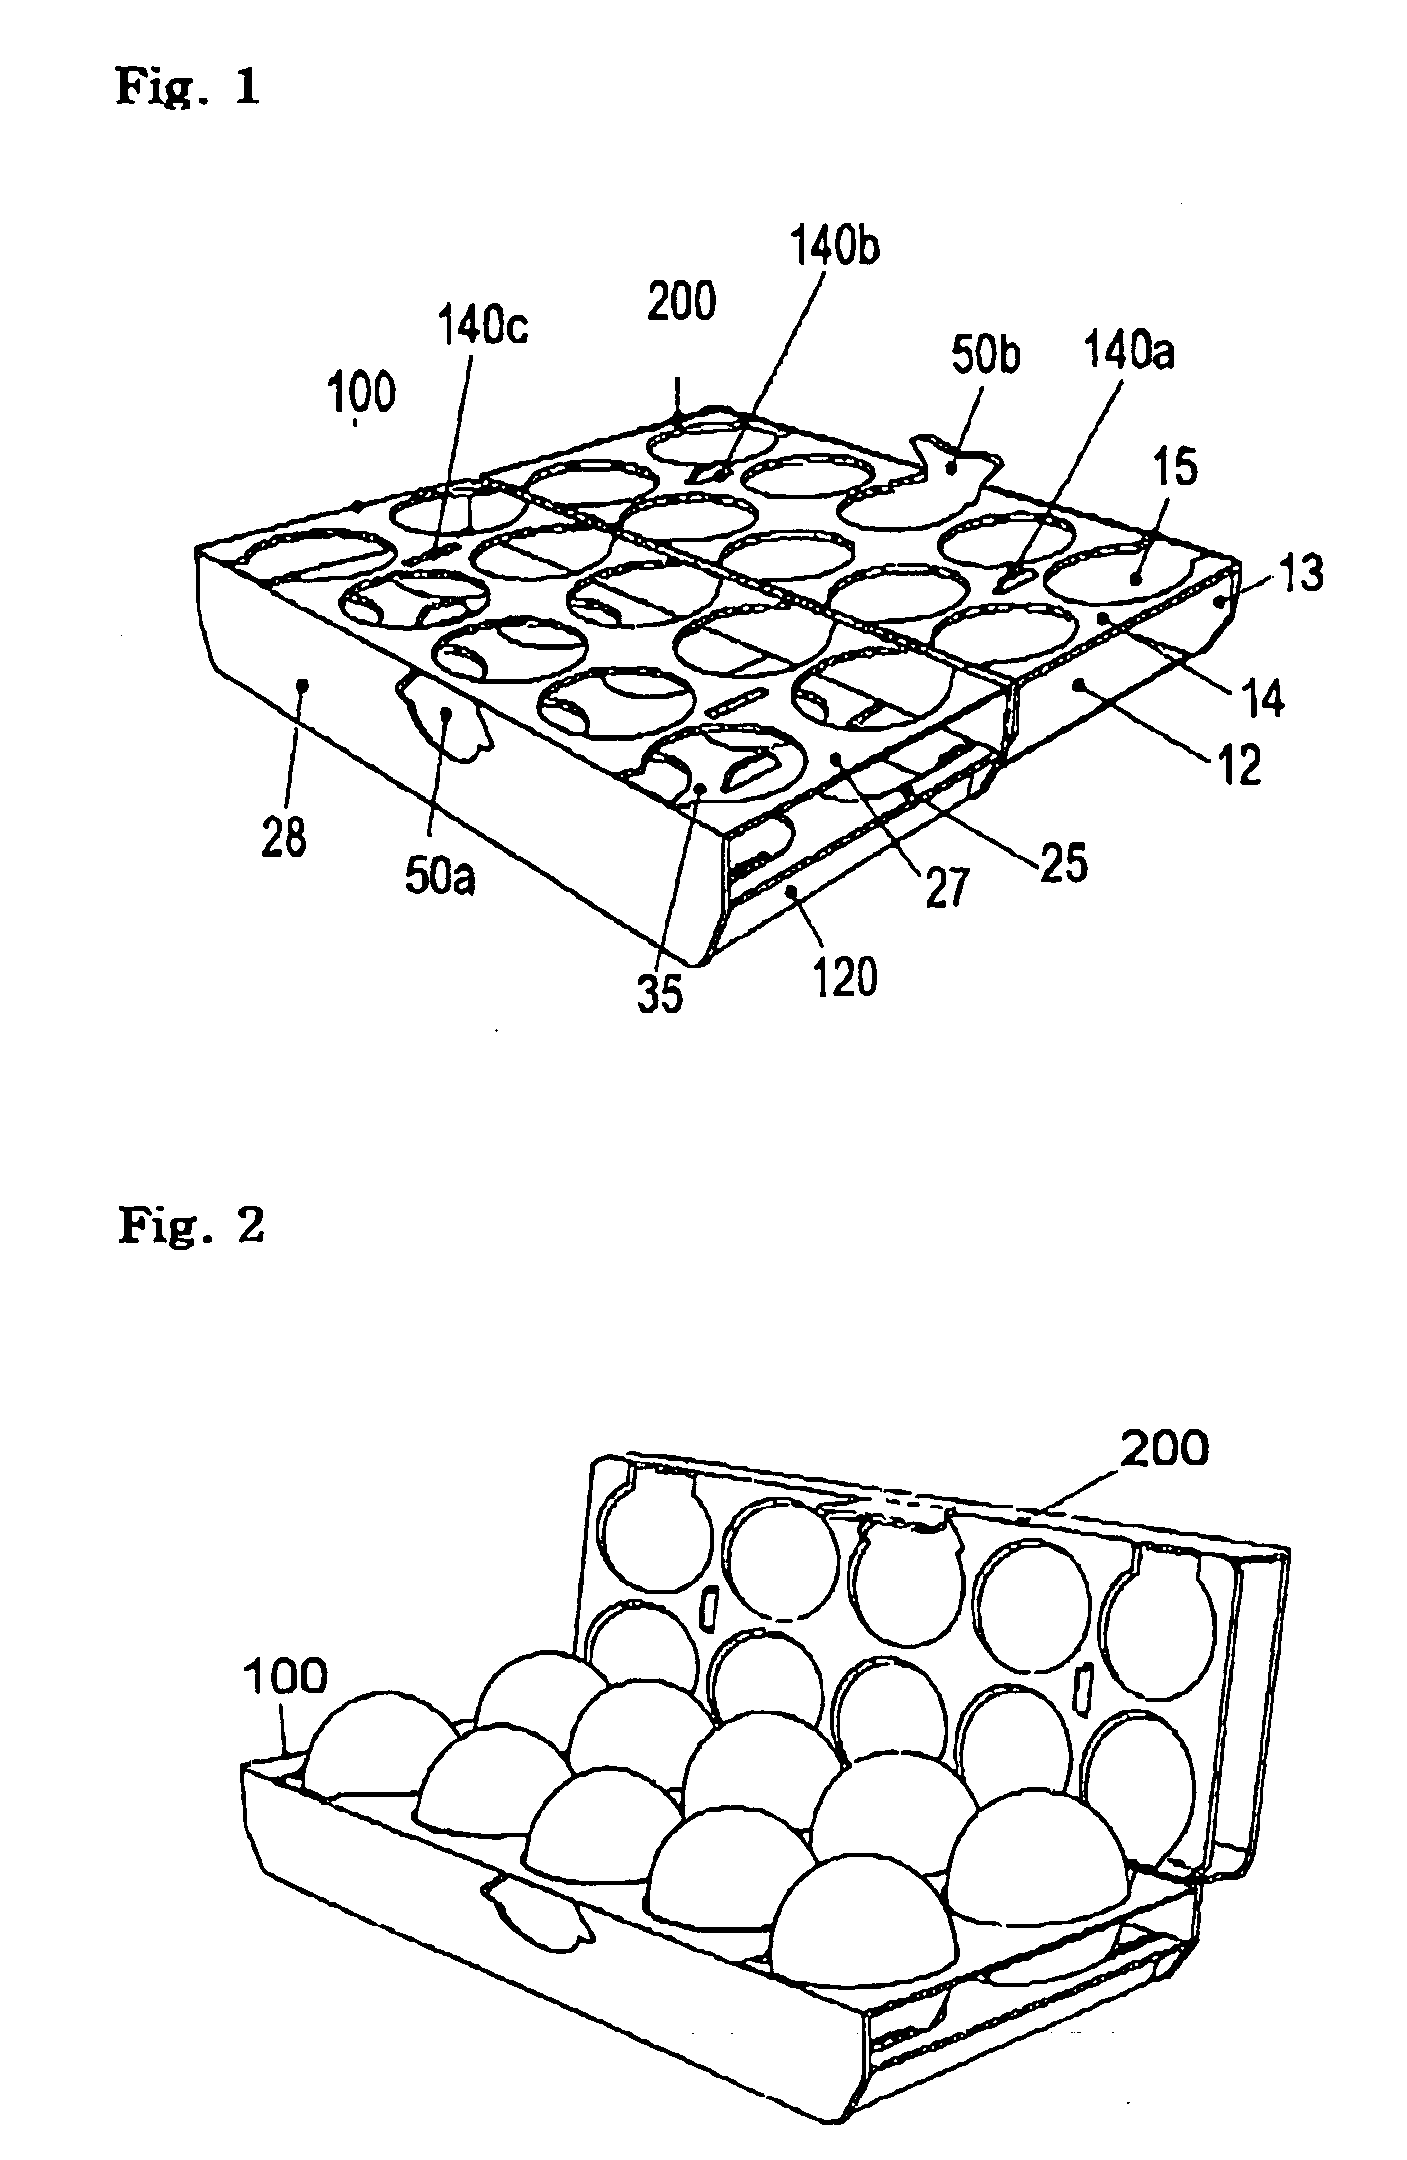 Egg packing container using paperboard